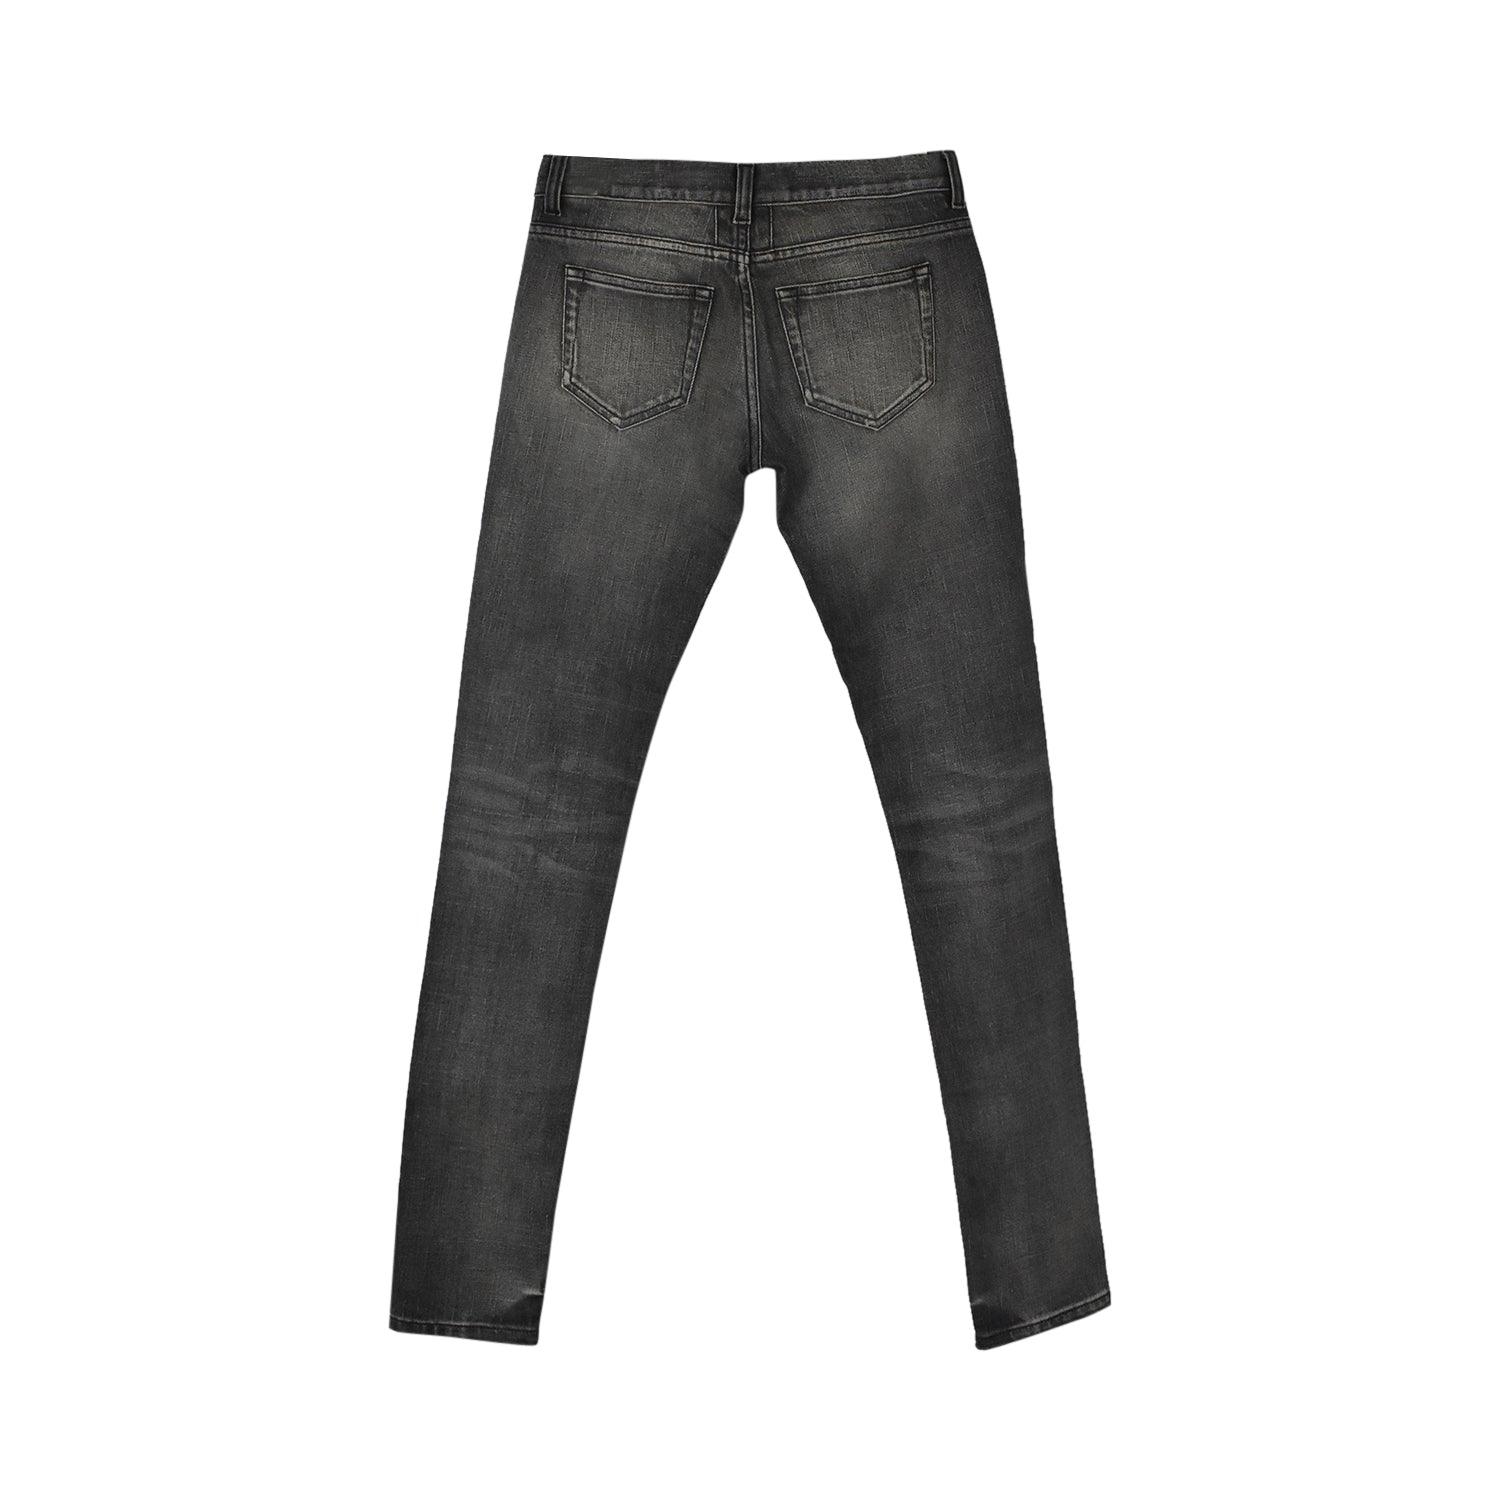 Saint Laurent Skinny Jeans - Women's 25 - Fashionably Yours